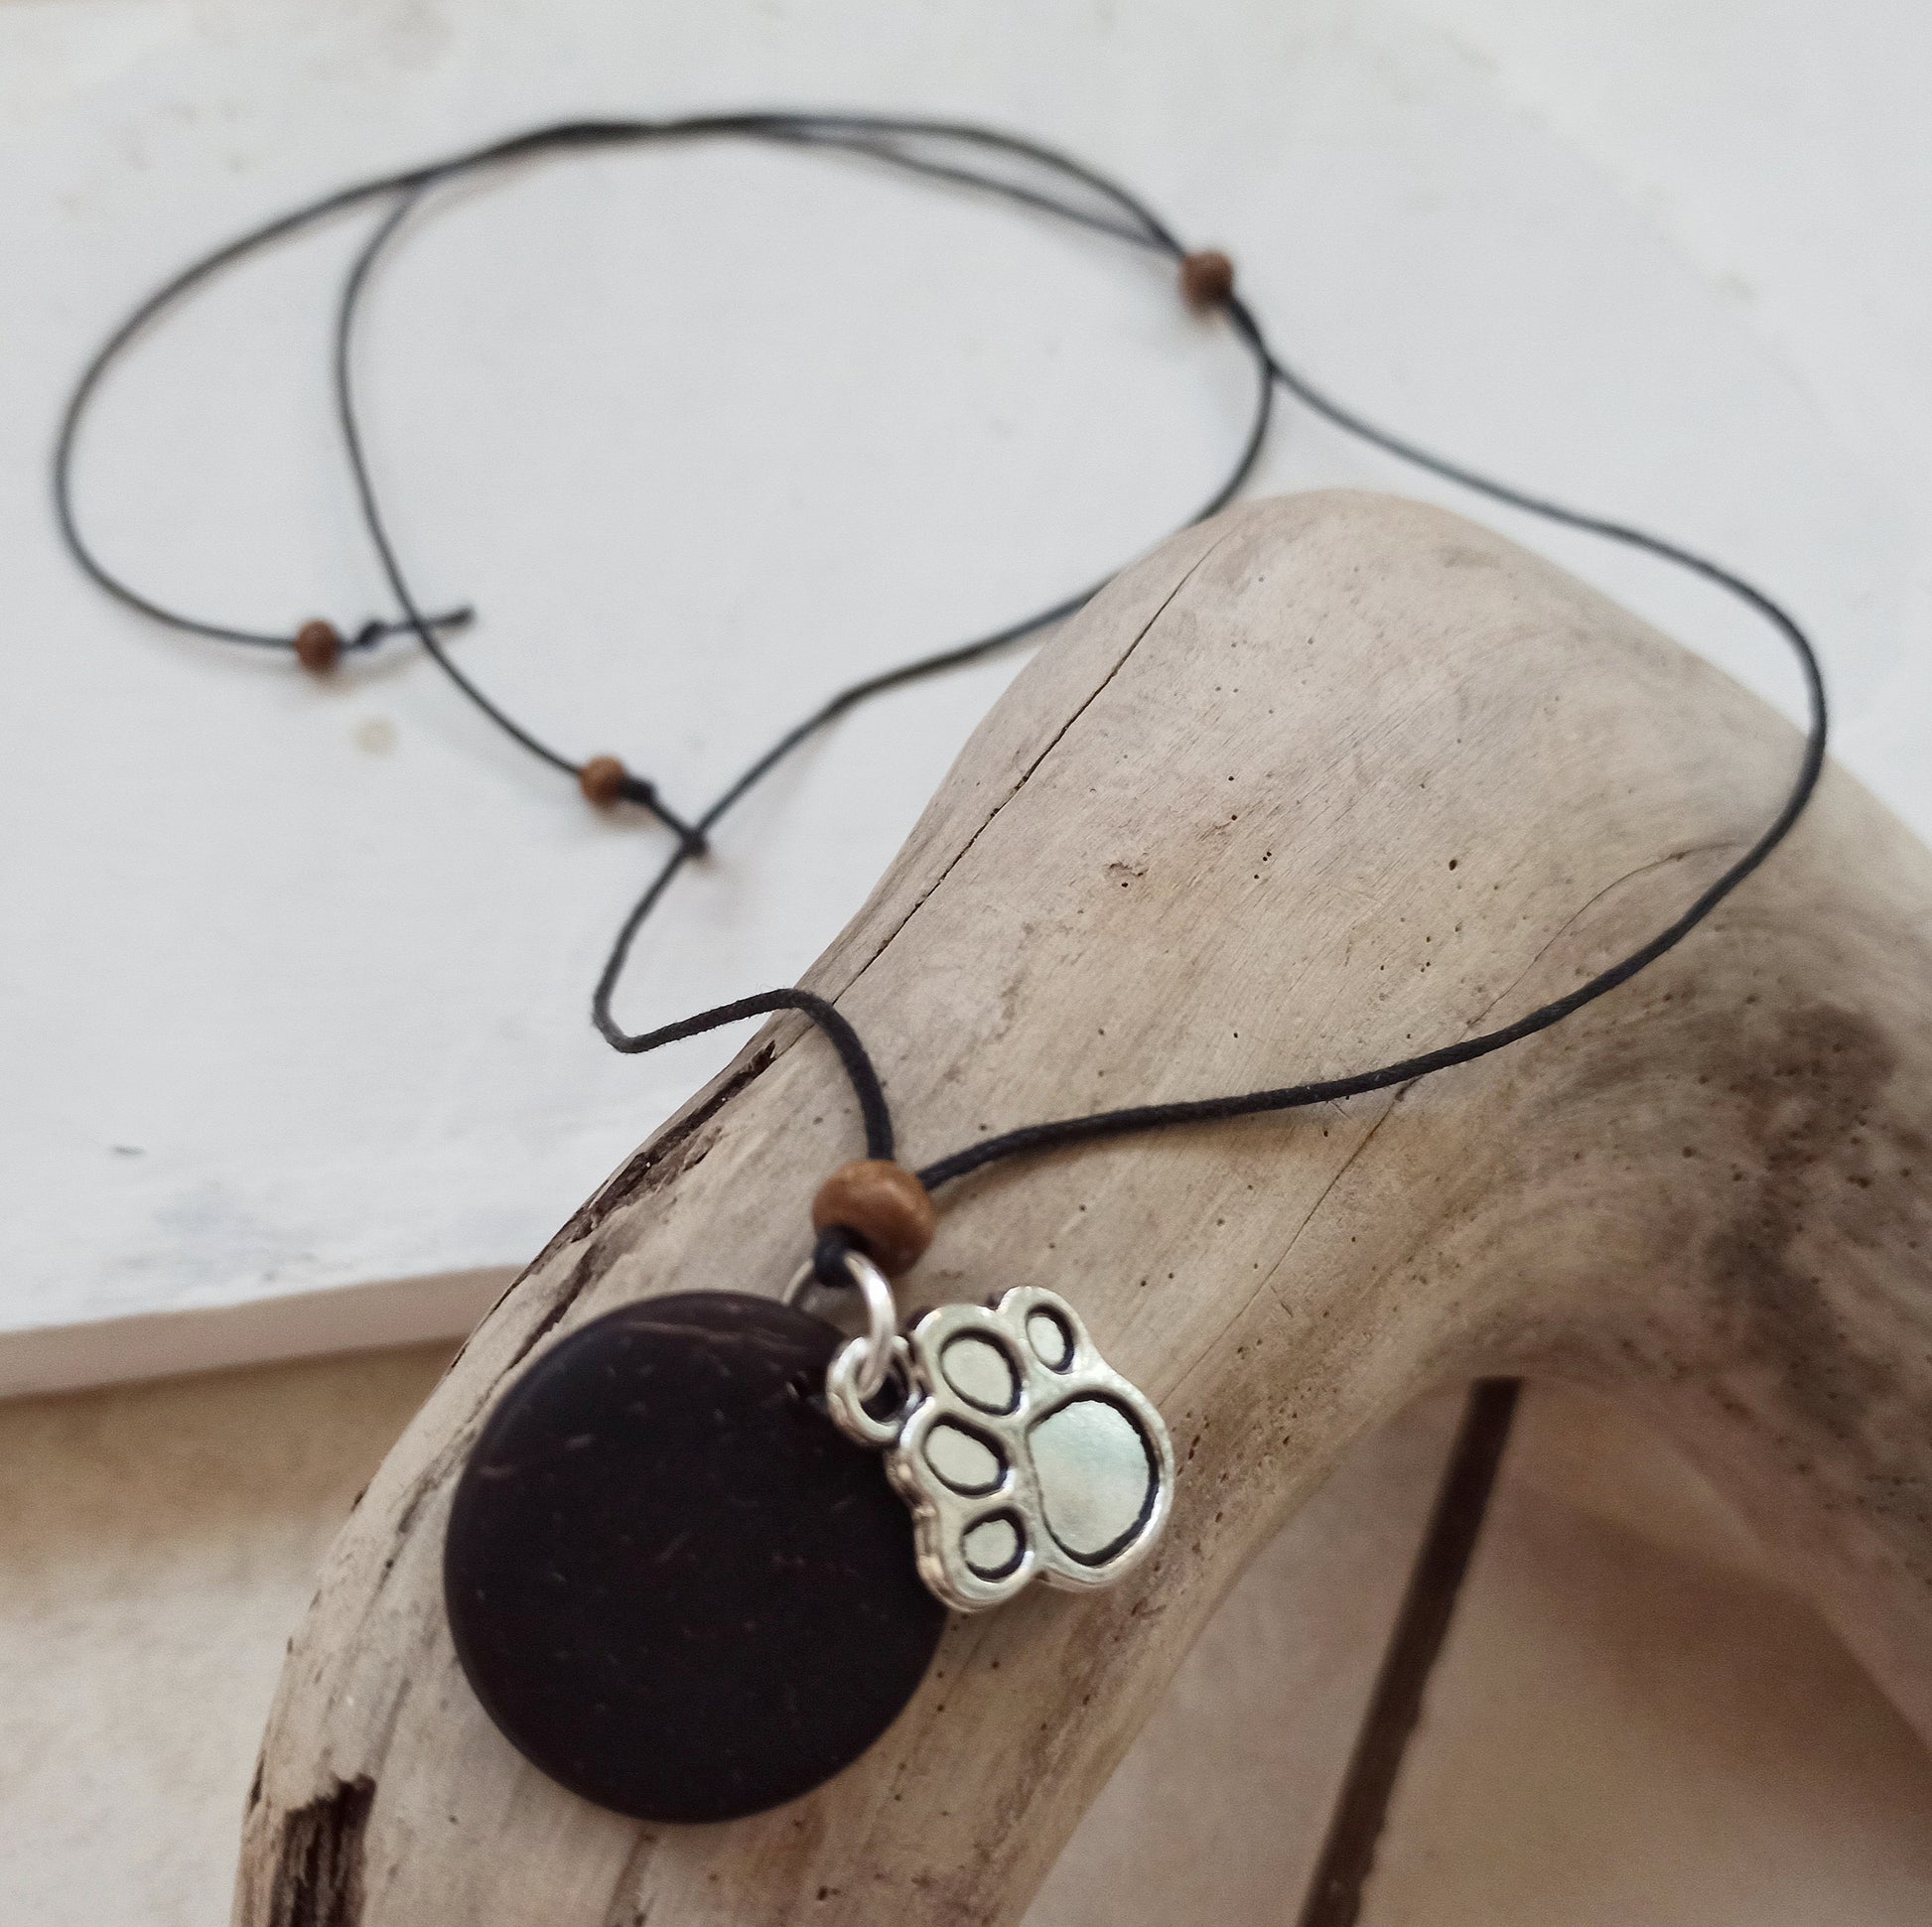 Dog Paw Print Silver Charm on Coconut Shell Backing Necklace. Pendant for a dog lover.